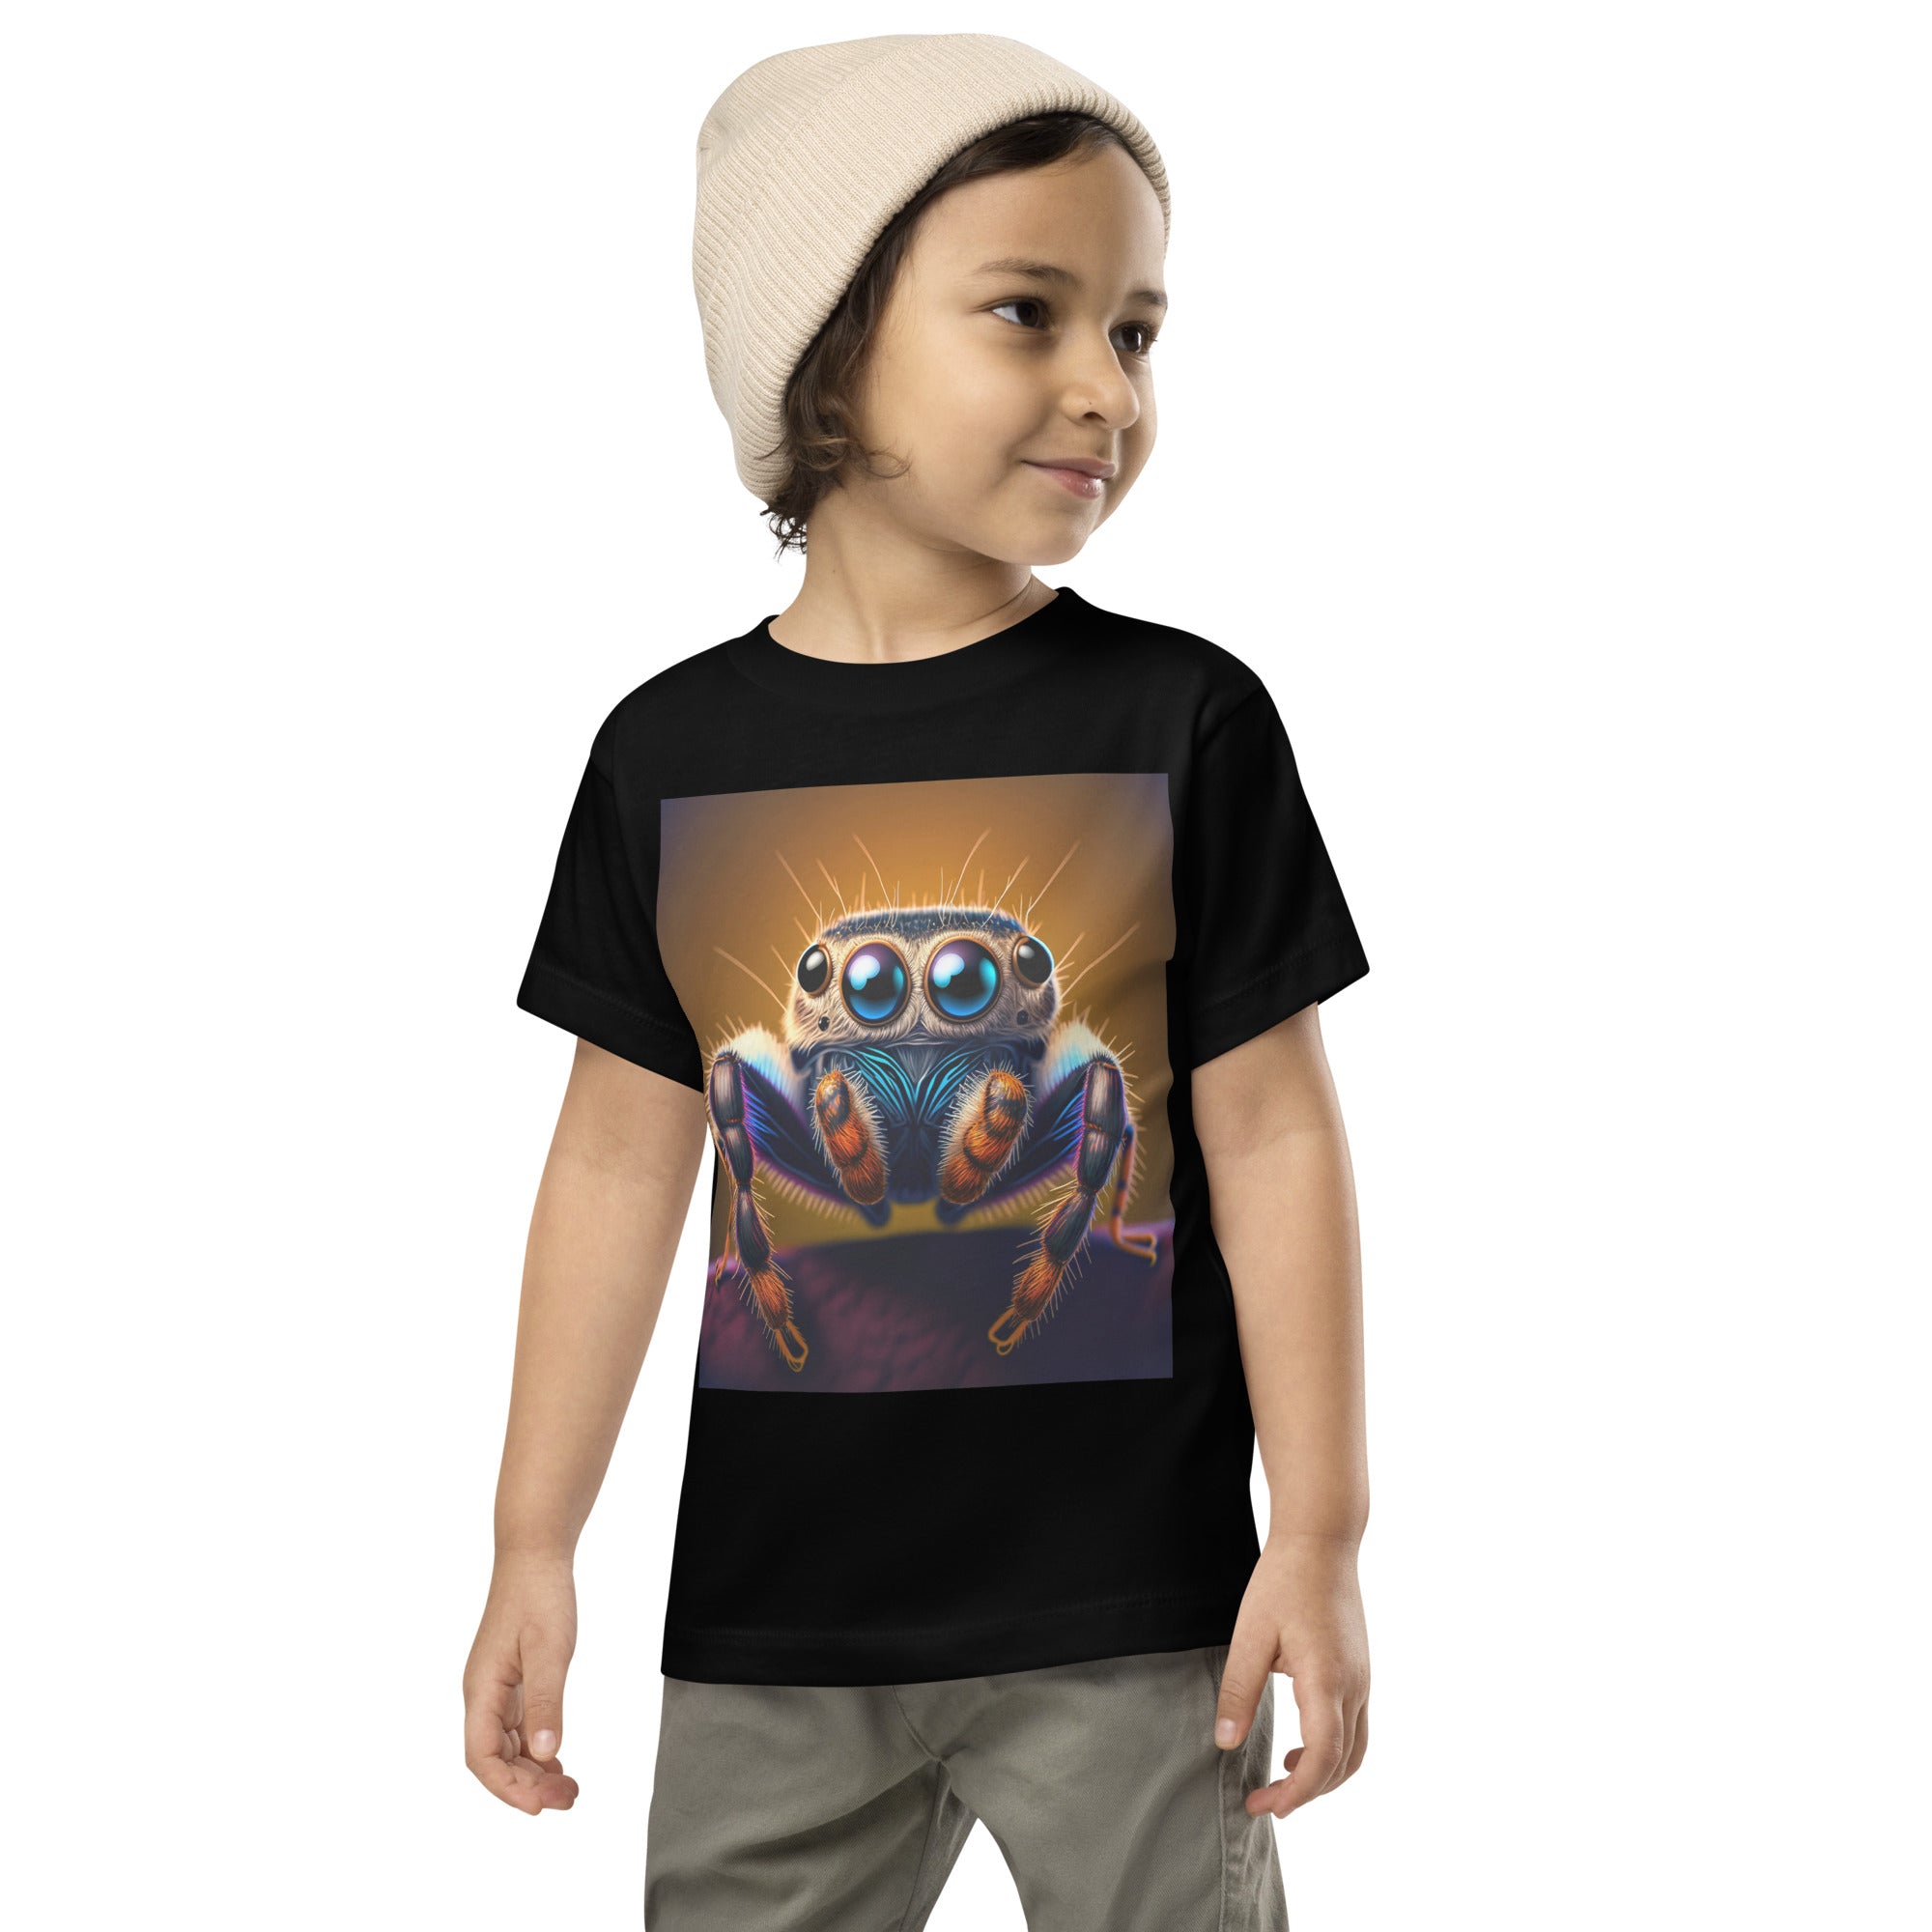 Kids & Youth Clothing